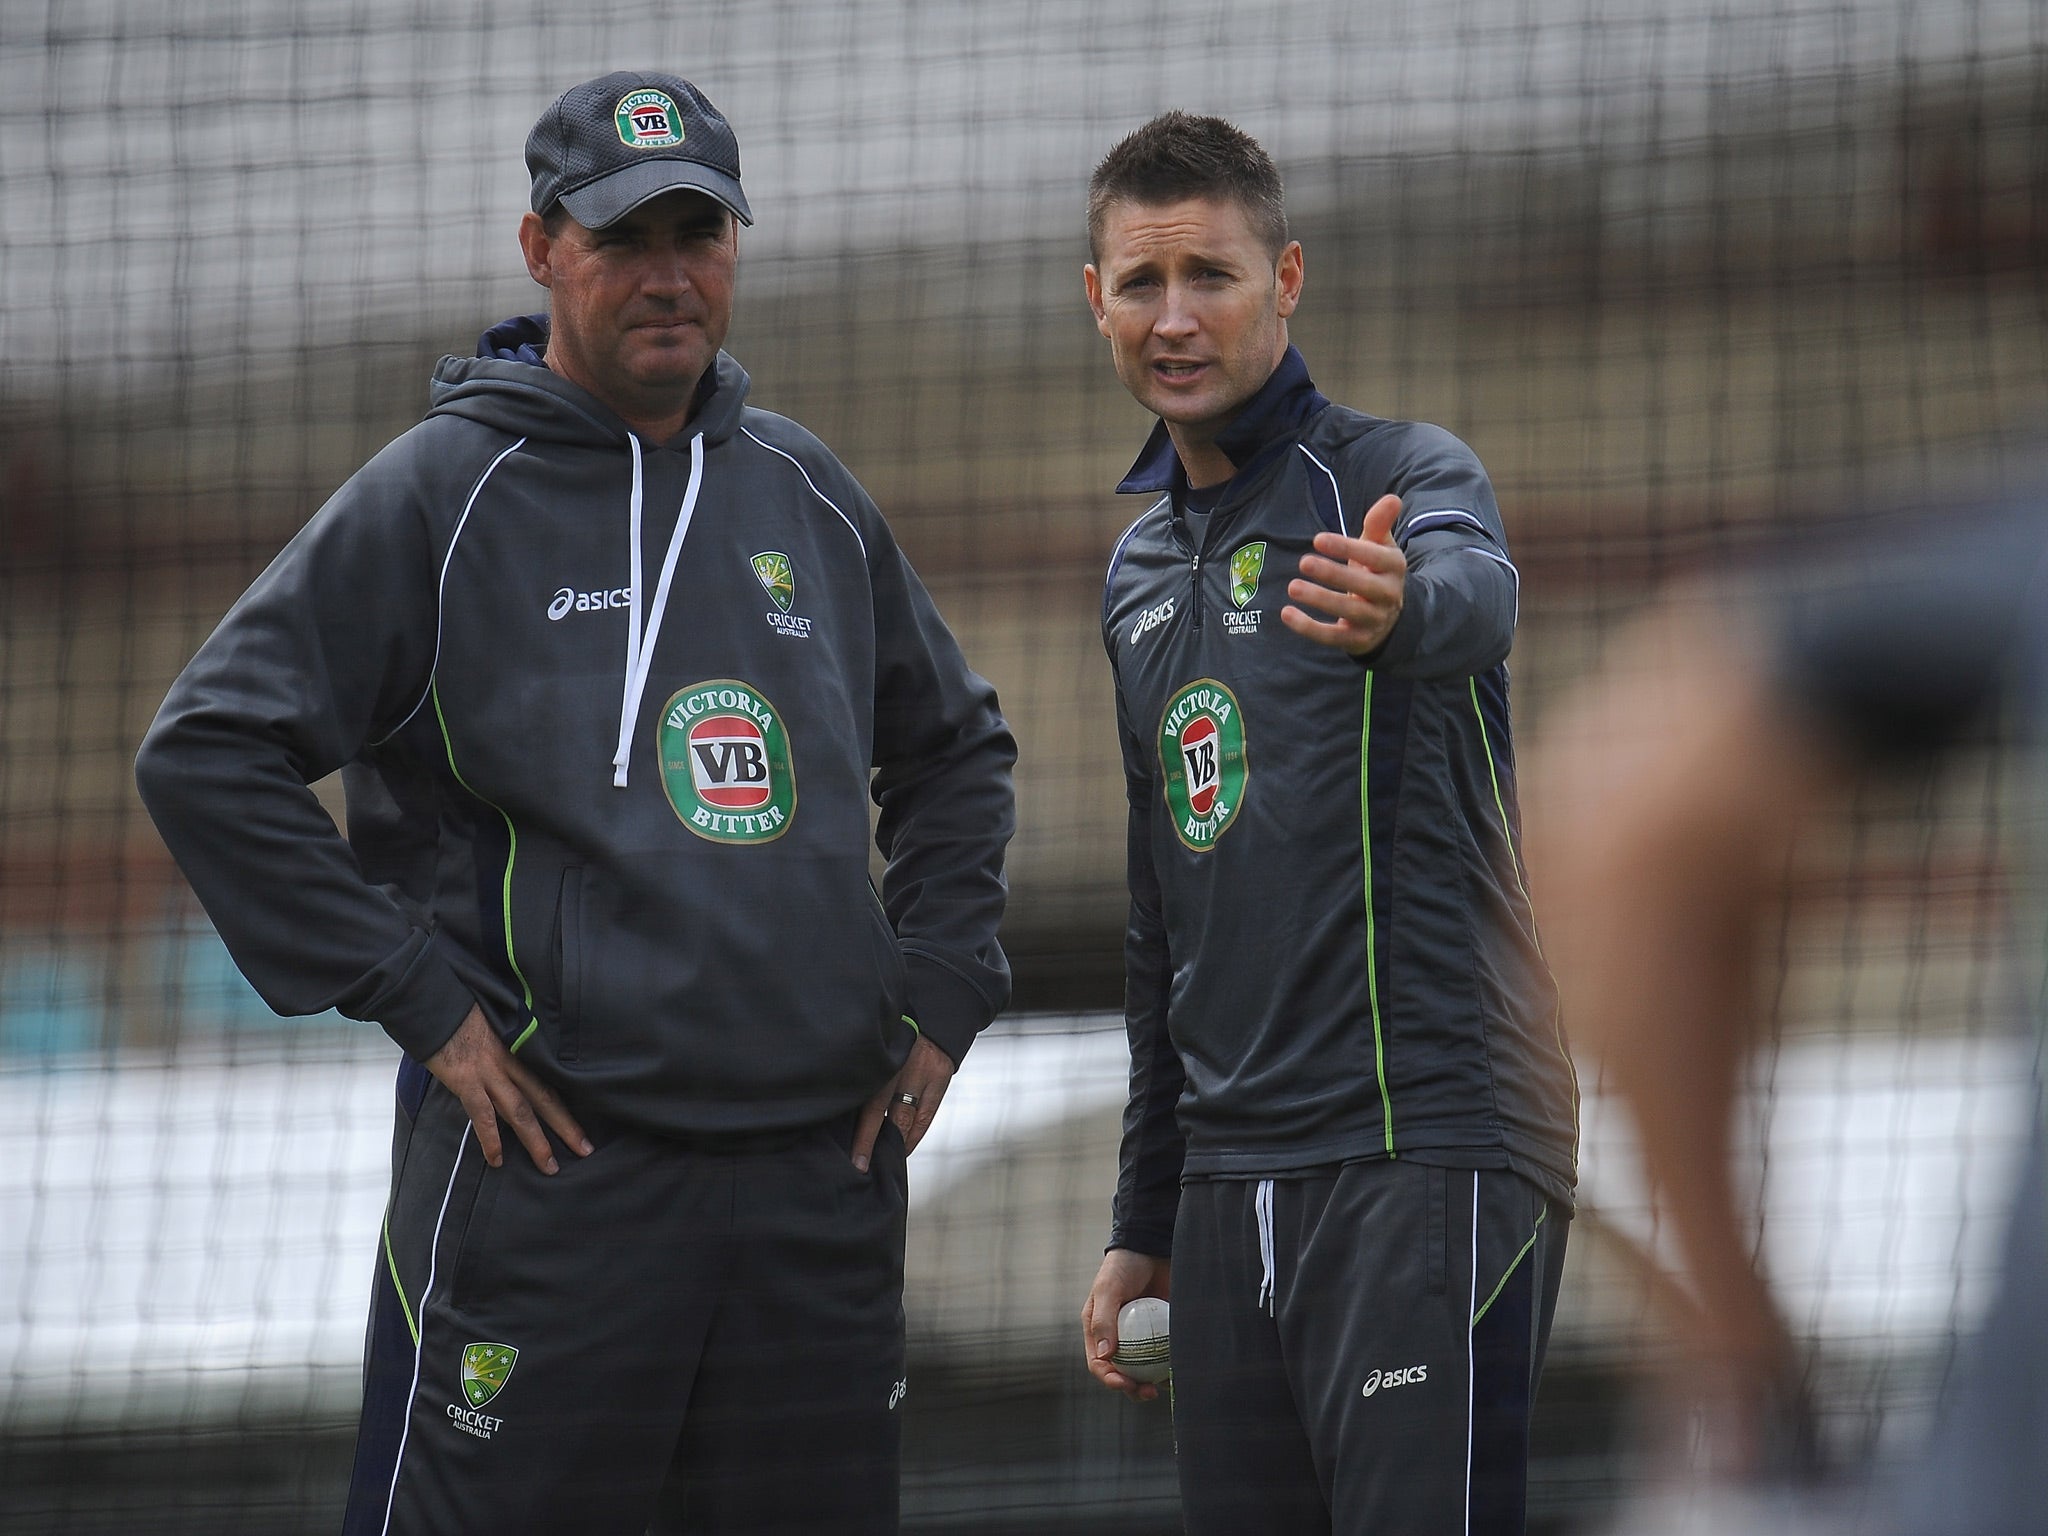 Australia captain Michael Clarke is yet to feature in this year's Champions Trophy